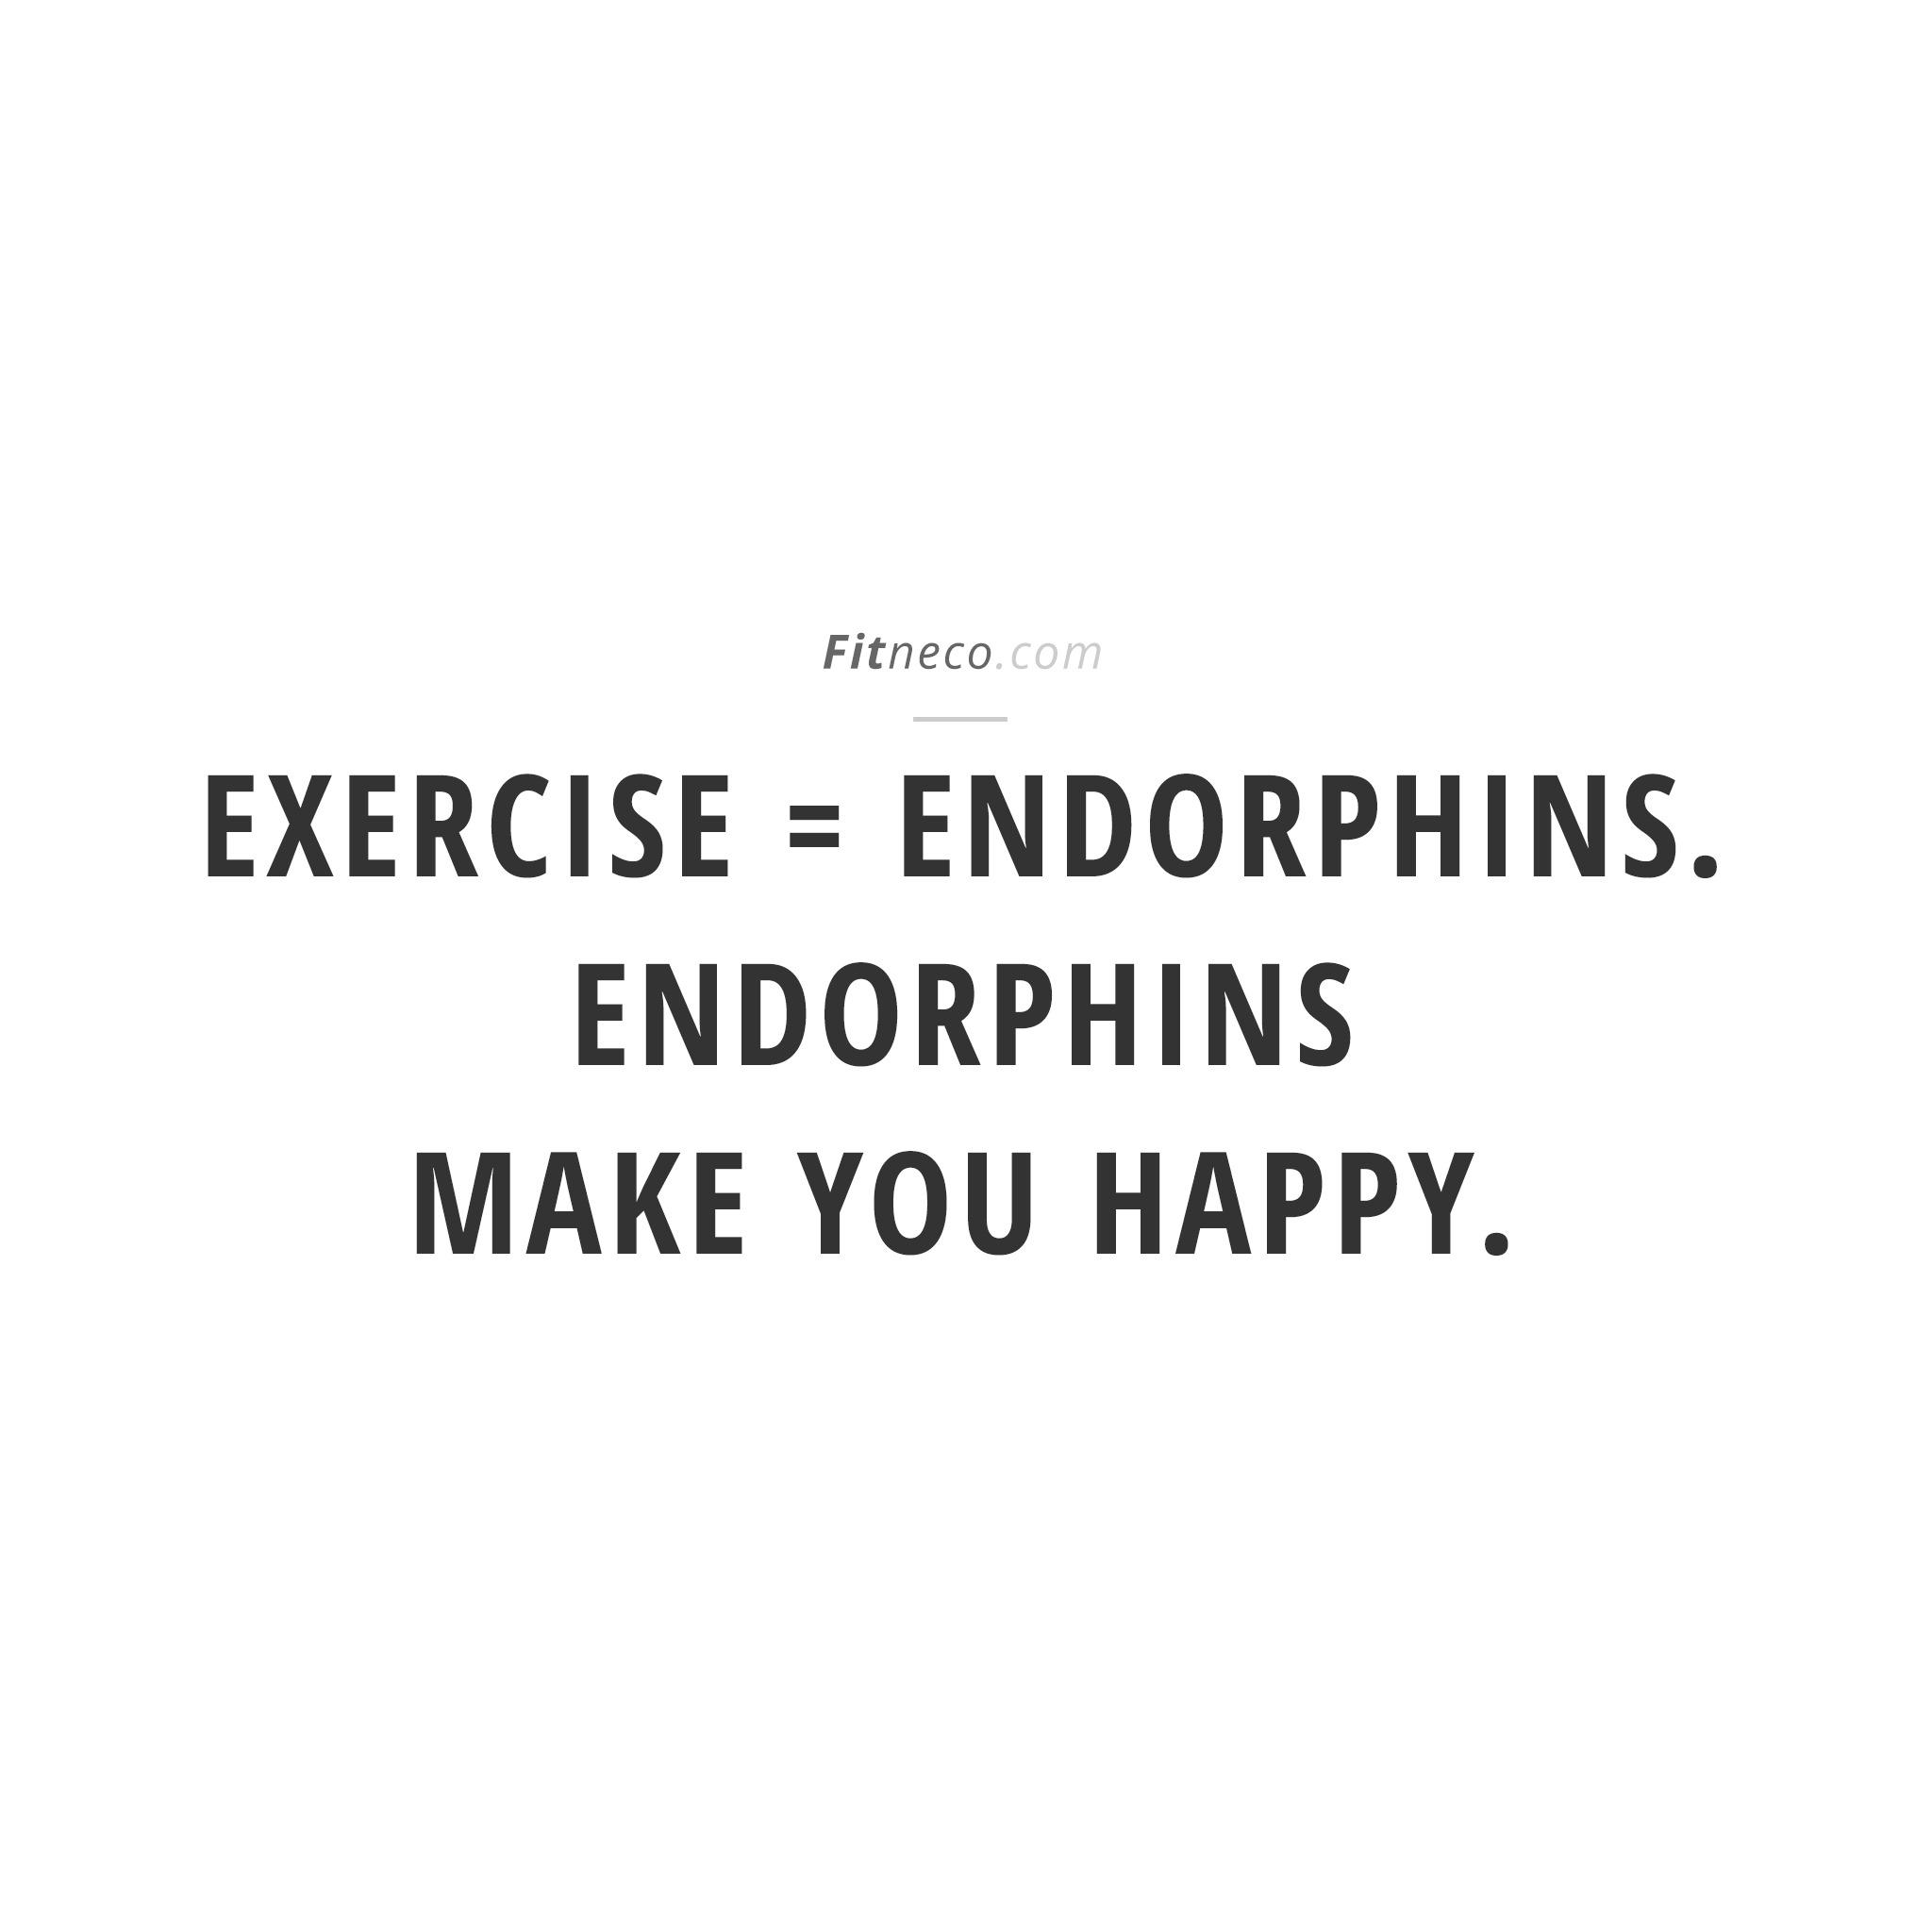 Fitneco On Twitter Exercise Equals Endorphins Endorphins Make You Happy Fitness Gym Motivation Quoteoftheday Quote Http T Co Eryiqzwoux